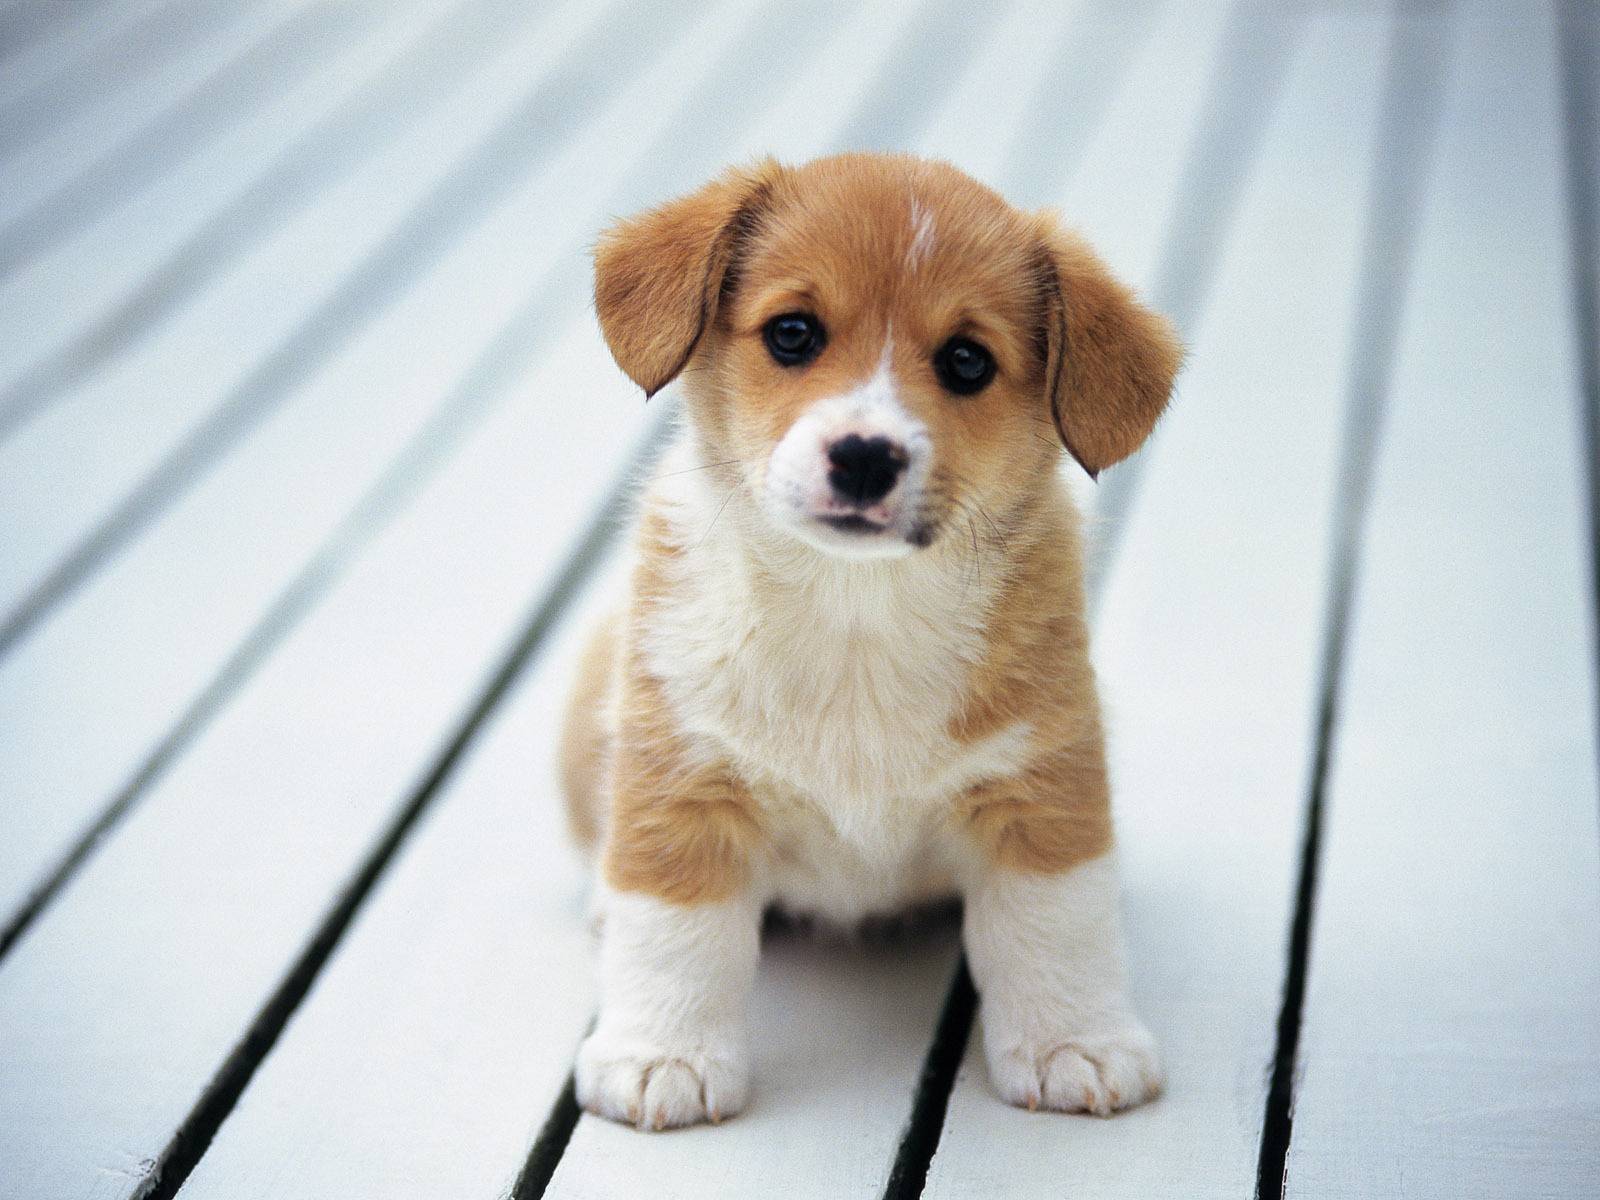  stuffpoint animals puppies images wallpapers cute puppy tweet